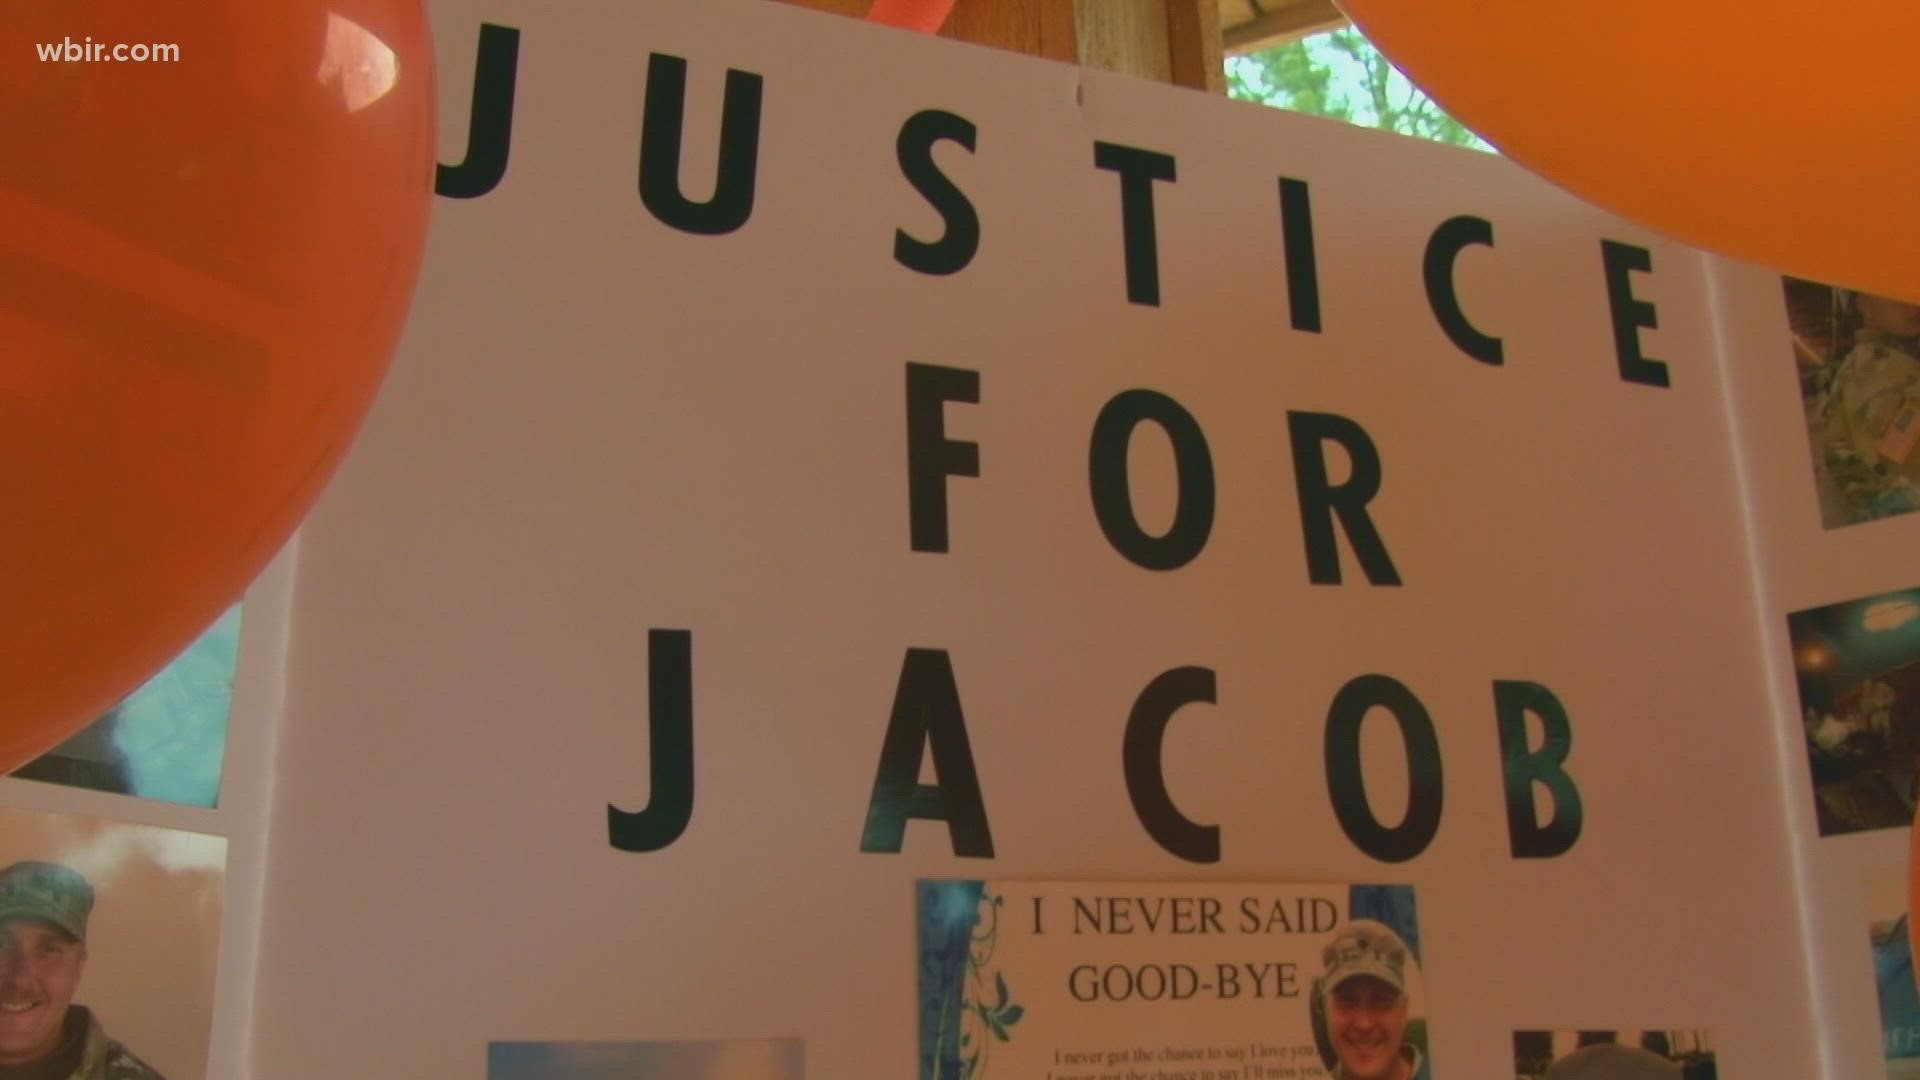 A memorial in Lenoir City honored the life of 35-year-old Jacob Bishop.